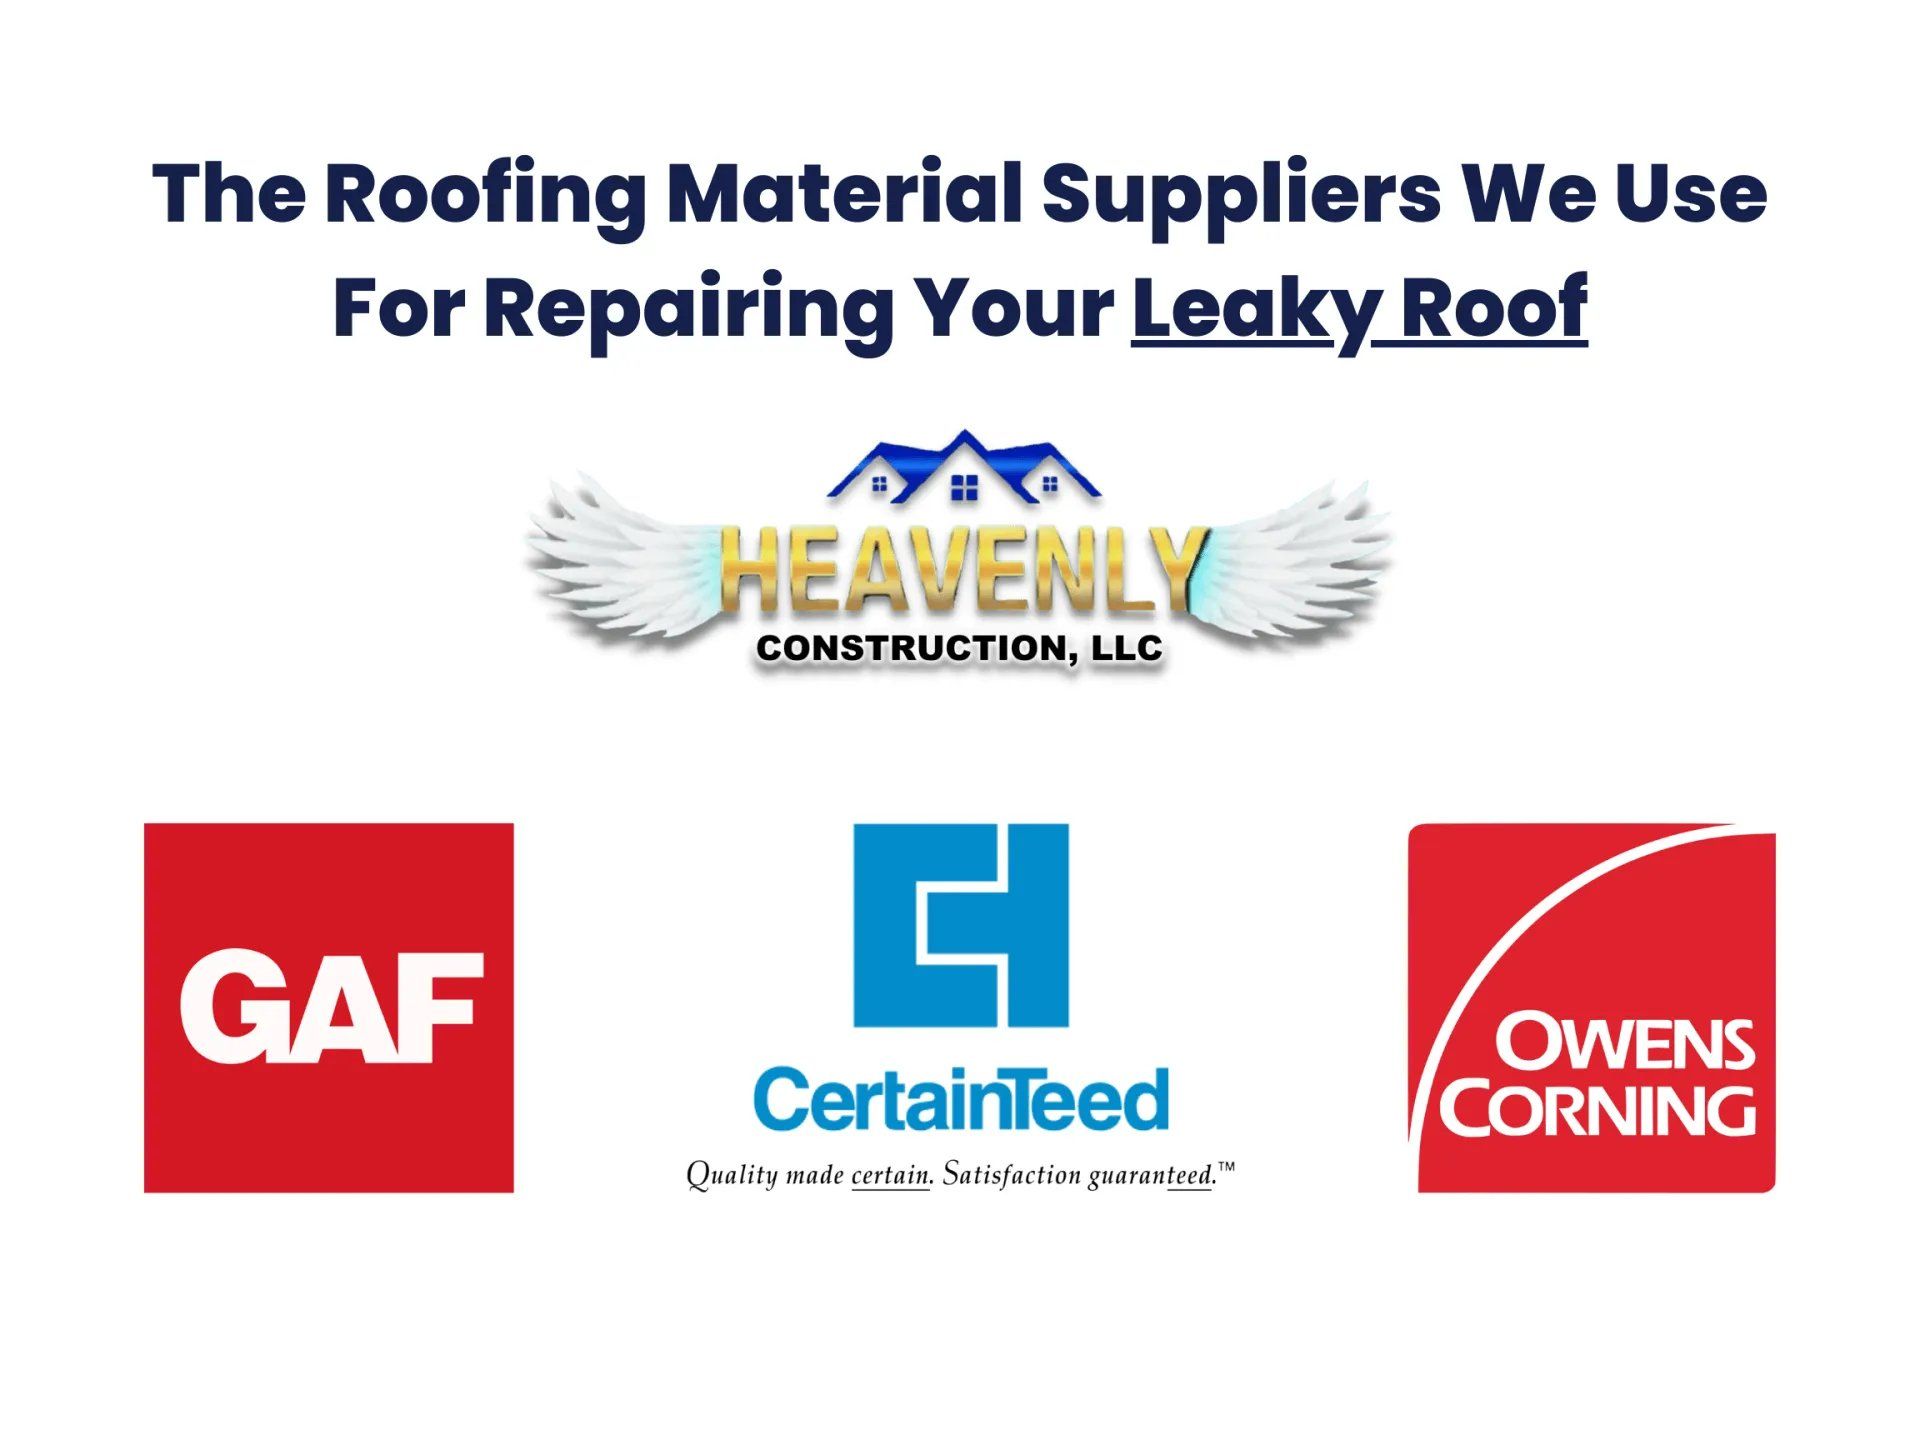 GAF, CertainTeed, and Owens Corning logos. Roof leak repair suppliers for Heavenly Construction.